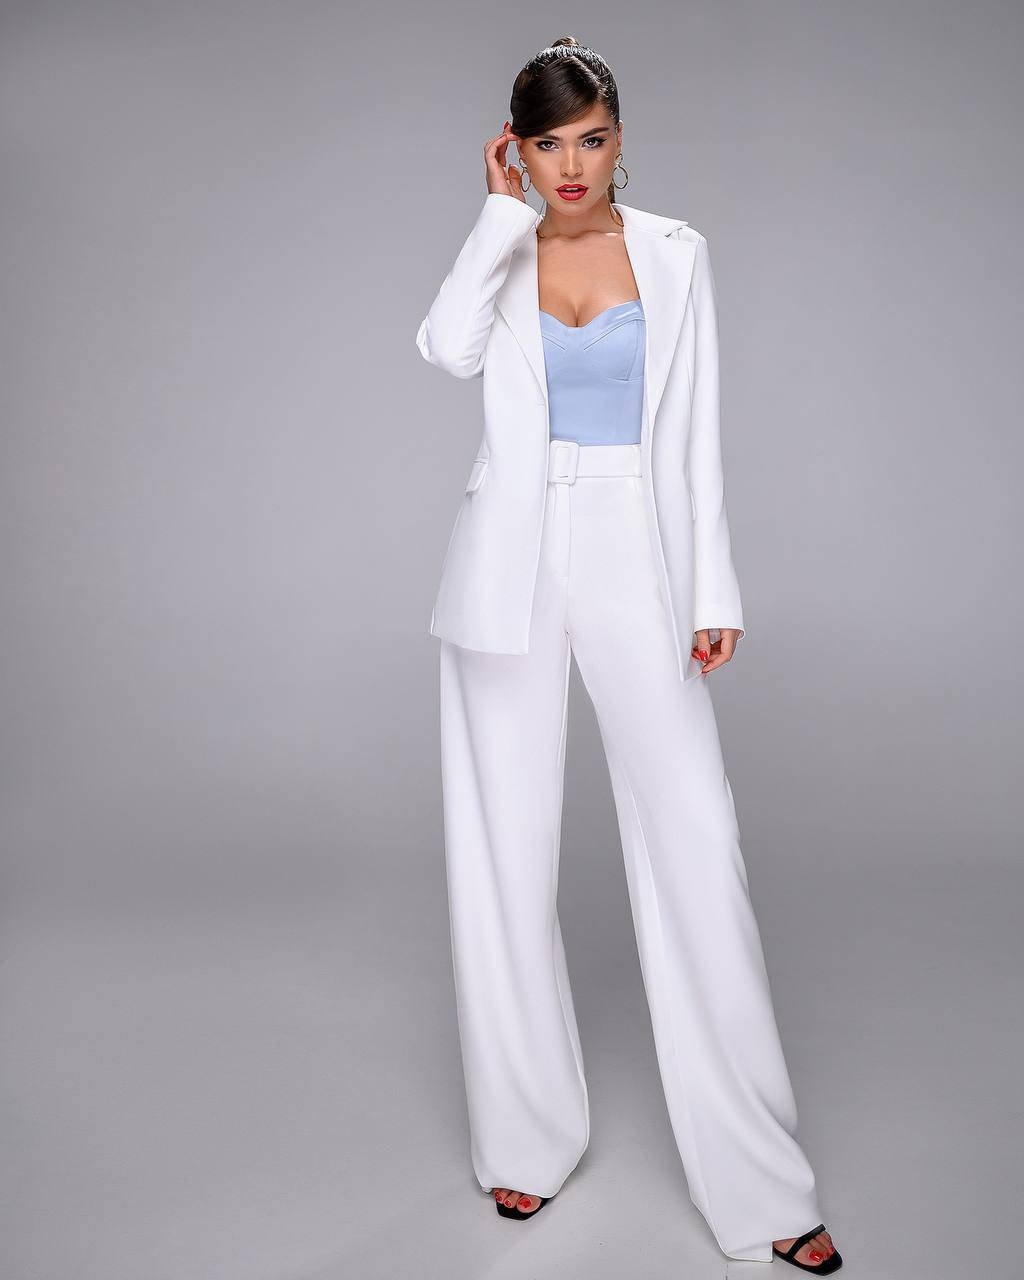 White Pantsuit for Women White Wide Leg Pants Suit Set With | Etsy